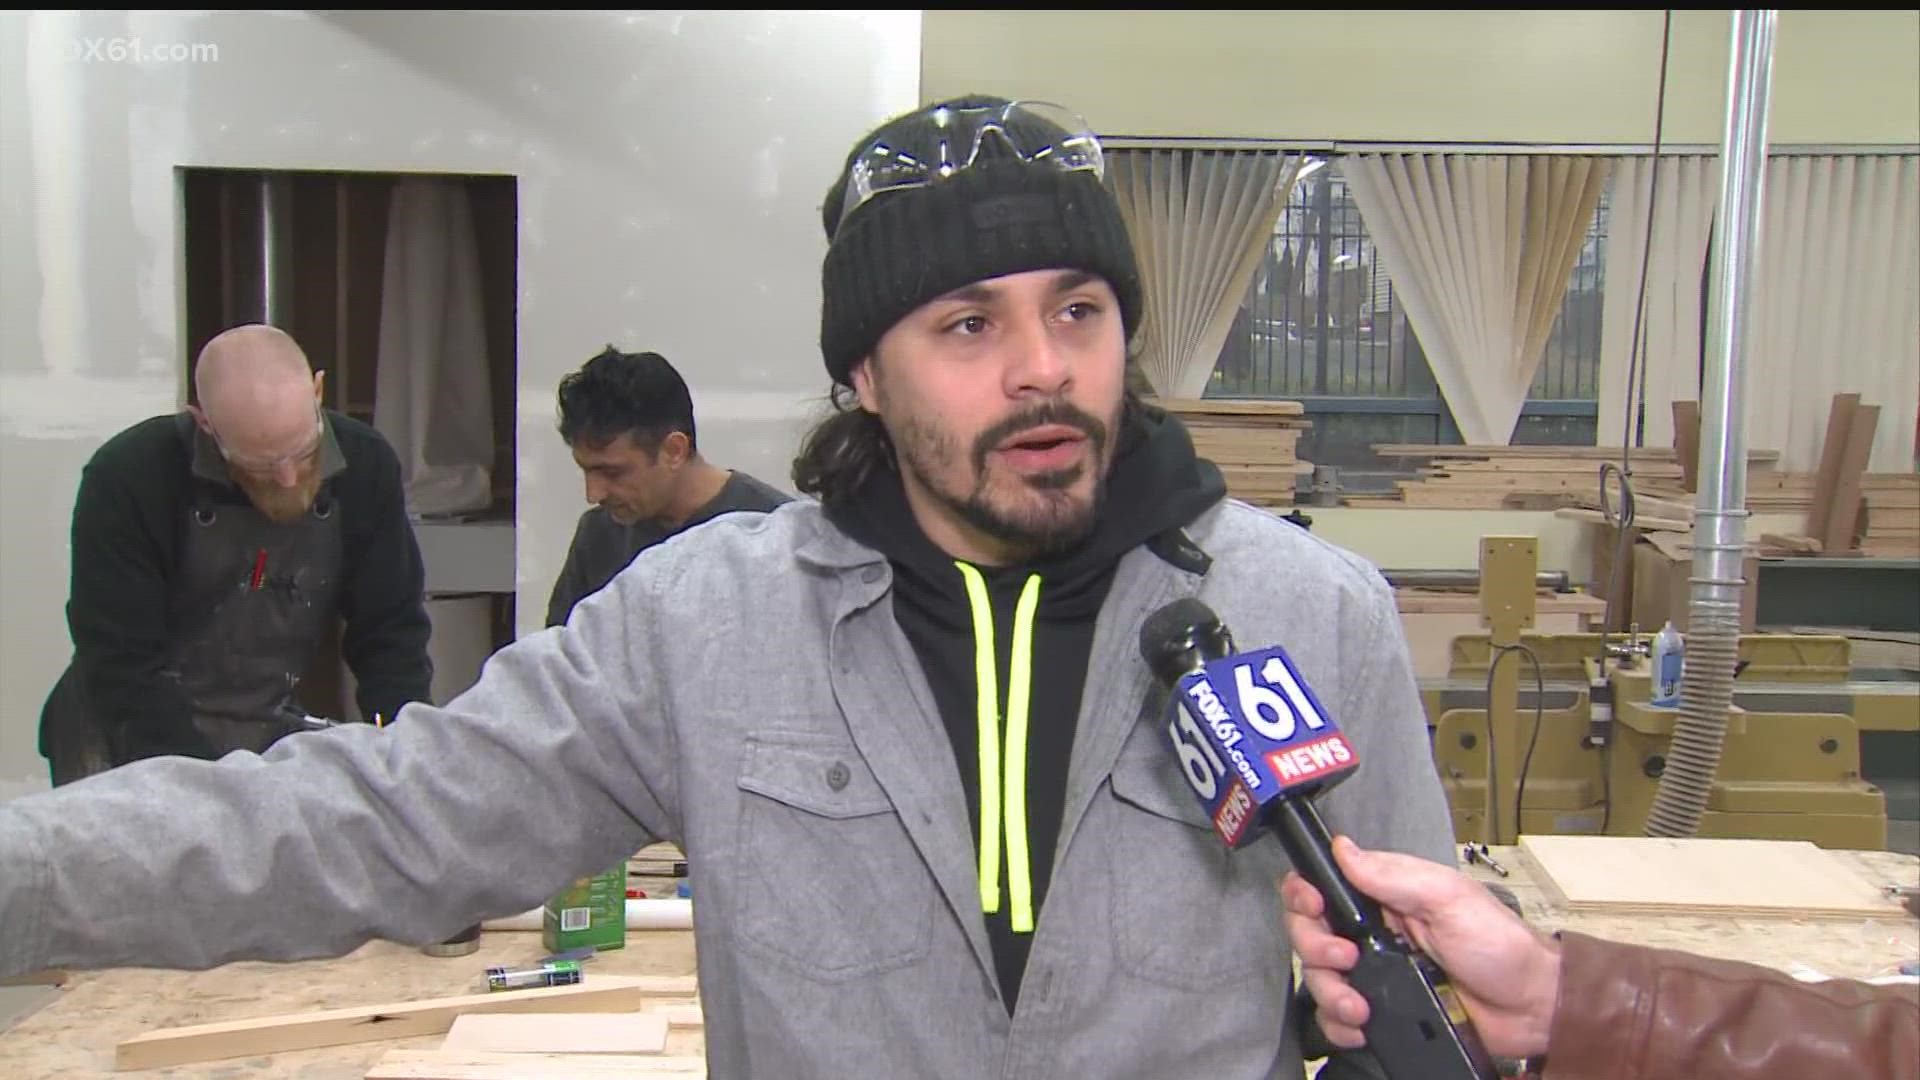 Fresh Start Hartford builds furniture and custom pieces while rebuilding lives.